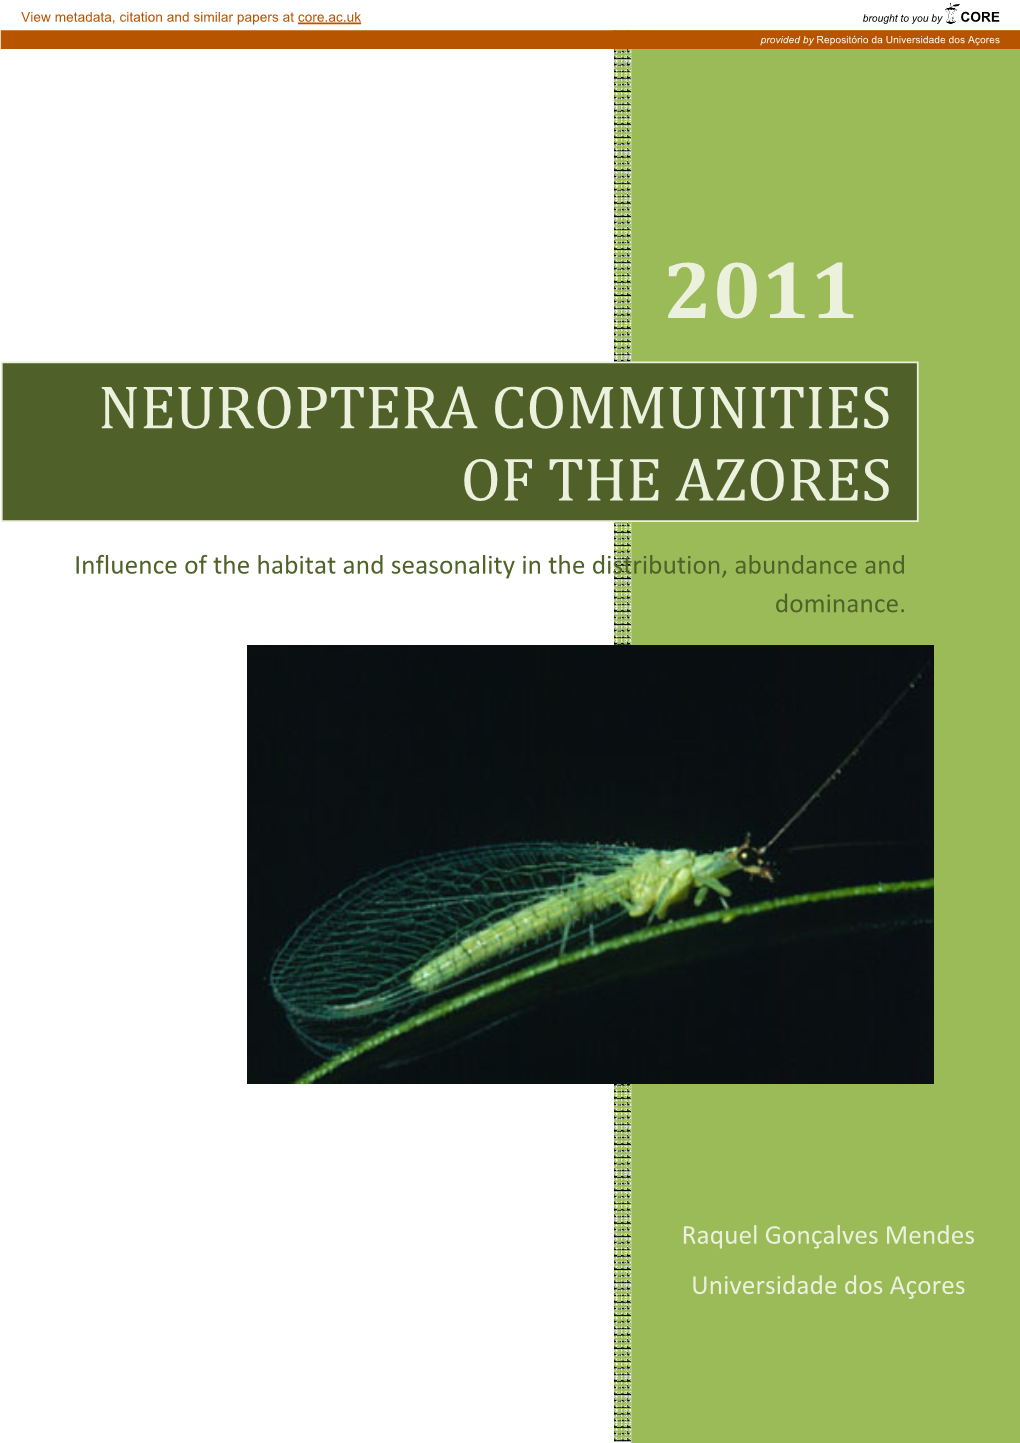 Neuroptera Communities of the Azores